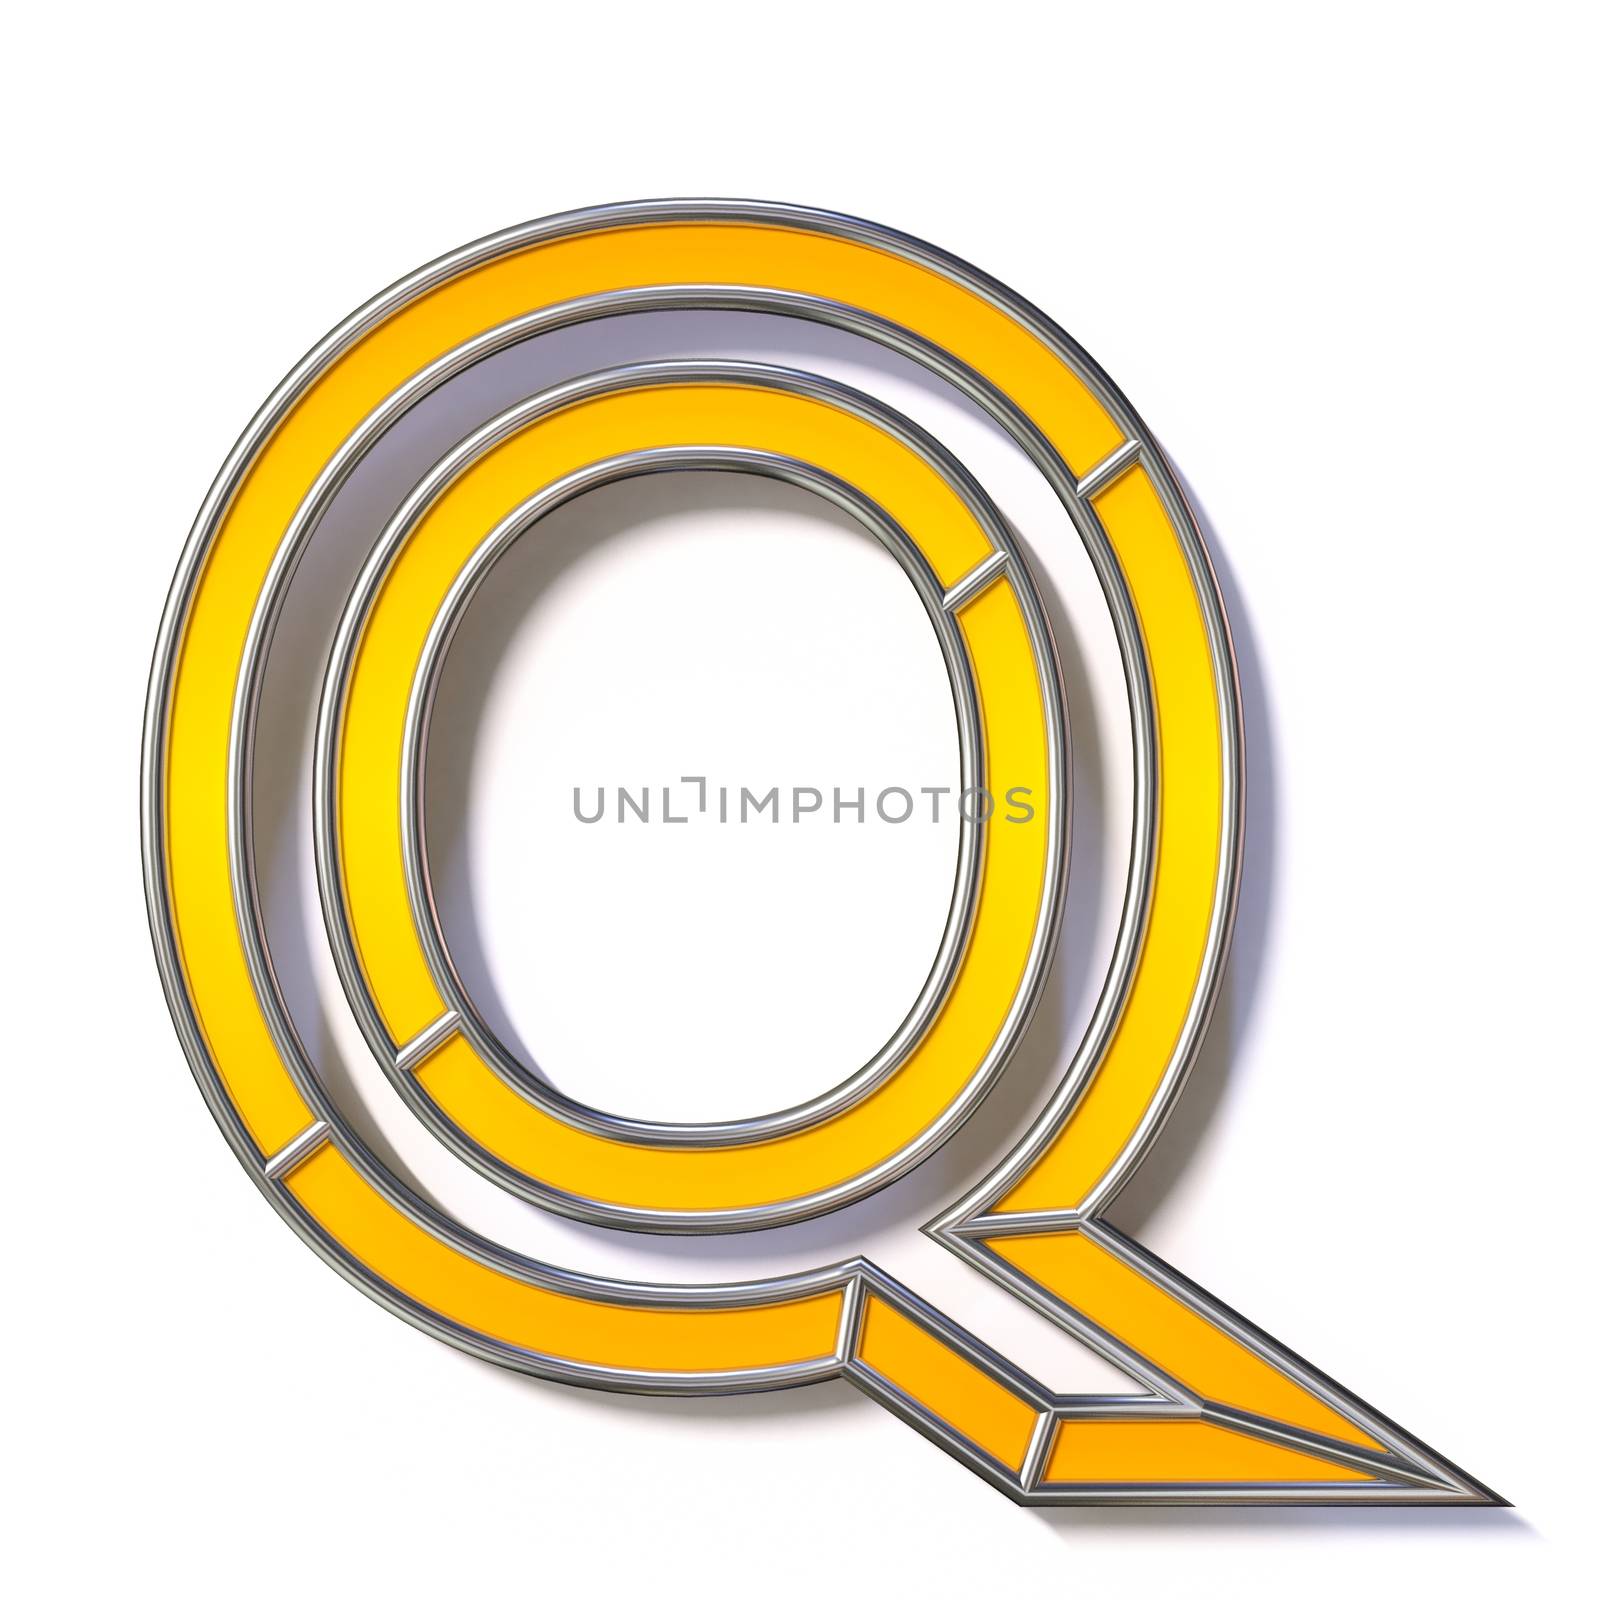 Orange metal wire font Letter Q 3D rendering illustration isolated on white background